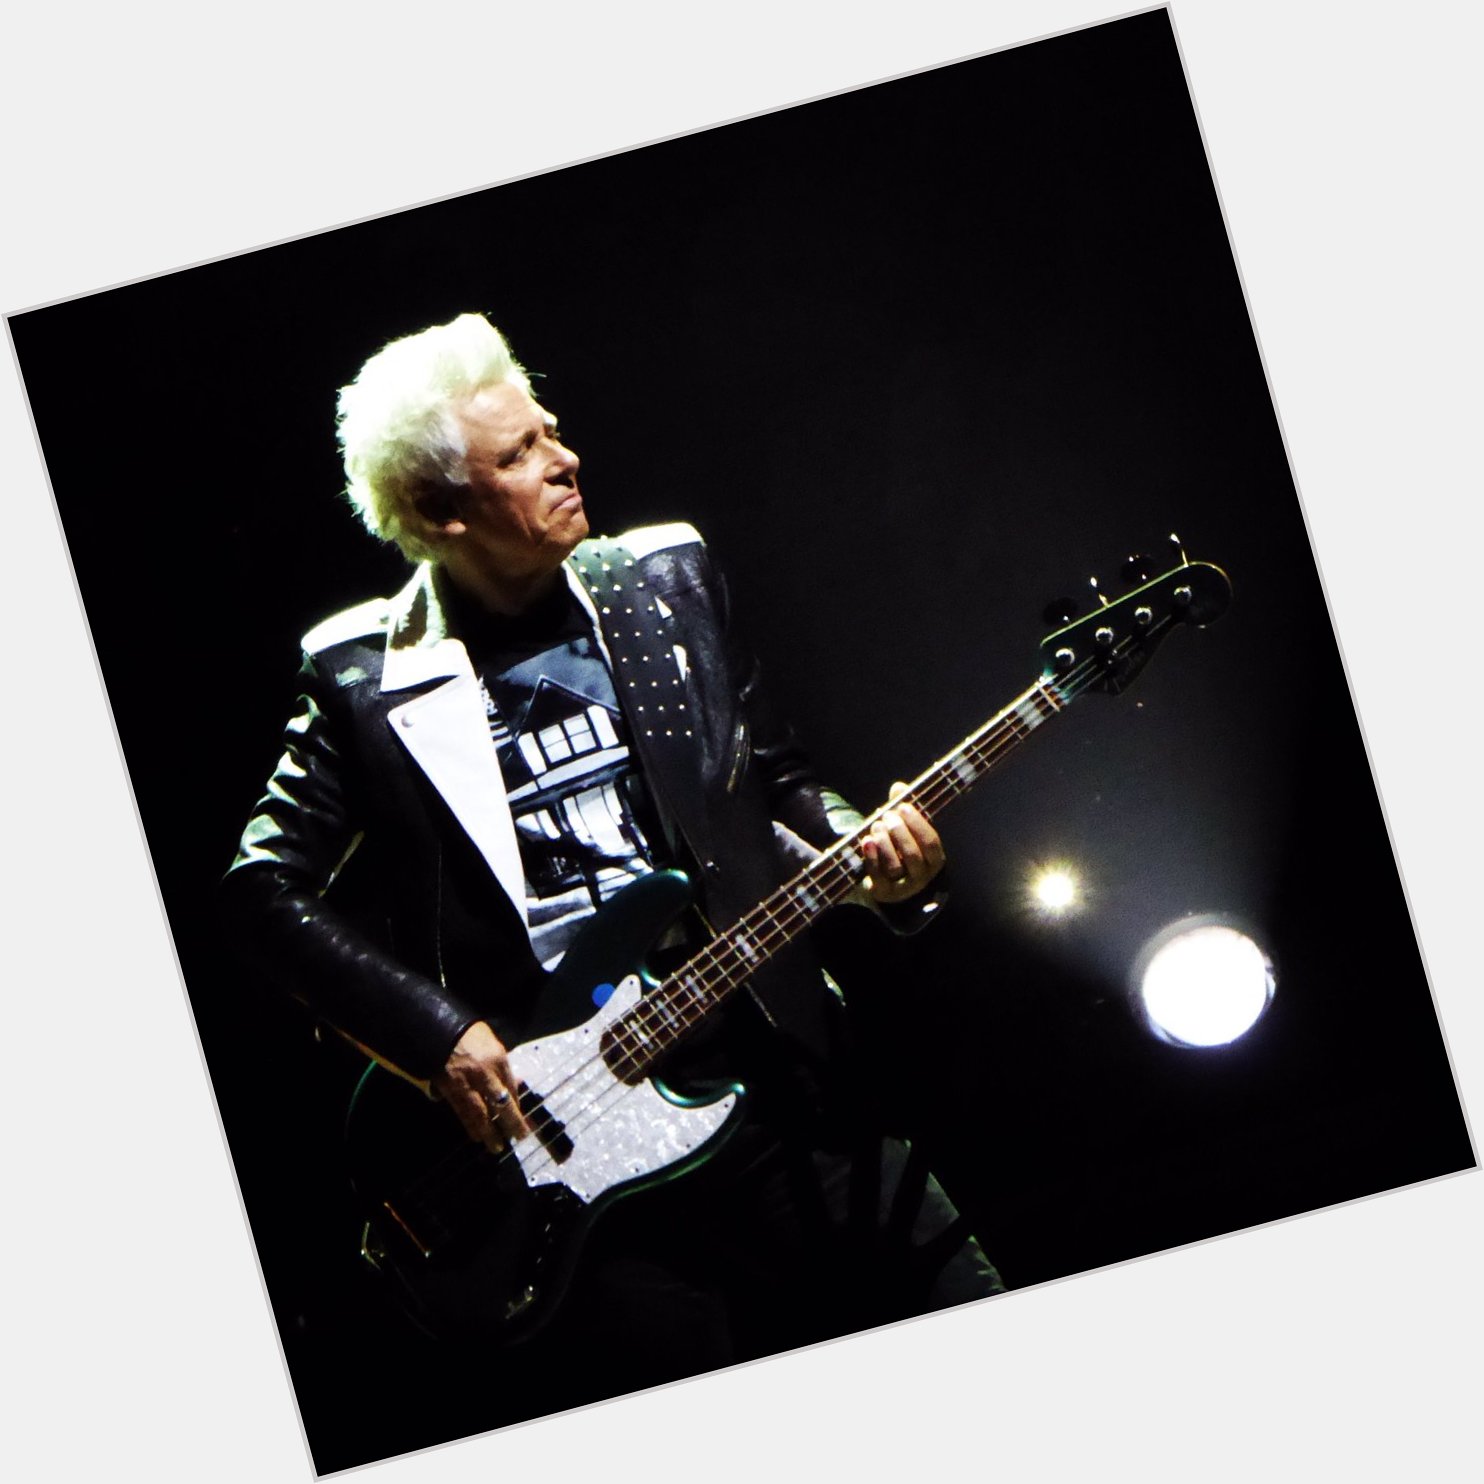 Happy birthday to the Bassman, the player of 4 strings, Adam Clayton!  